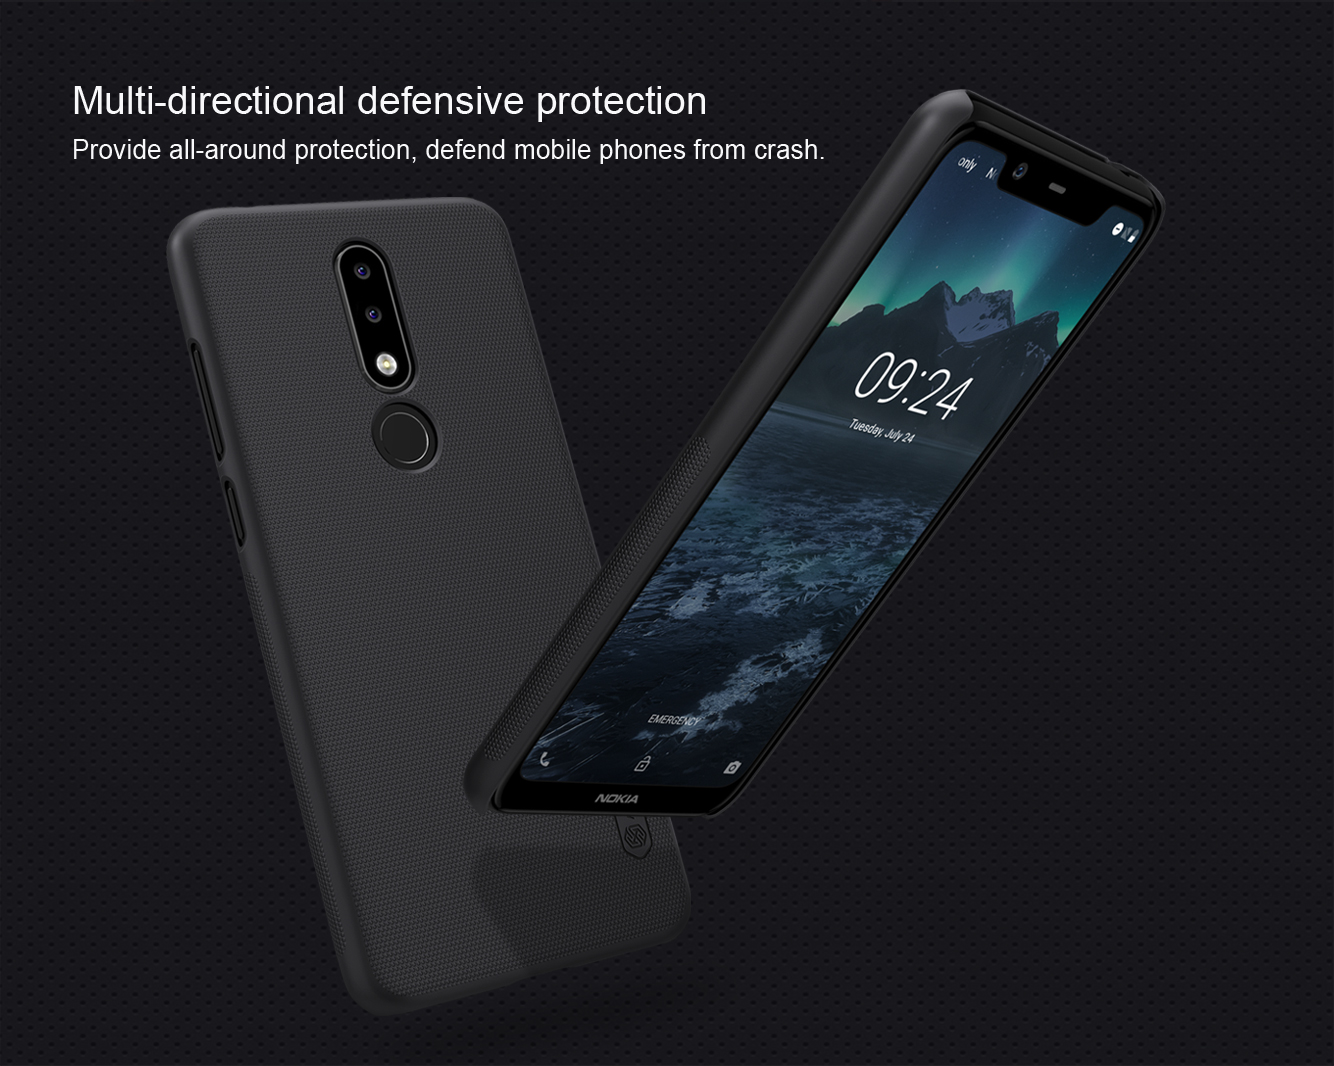 Nillkin Super Frosted Shield Matte cover case for Nokia 5.1 Plus (Nokia X5)